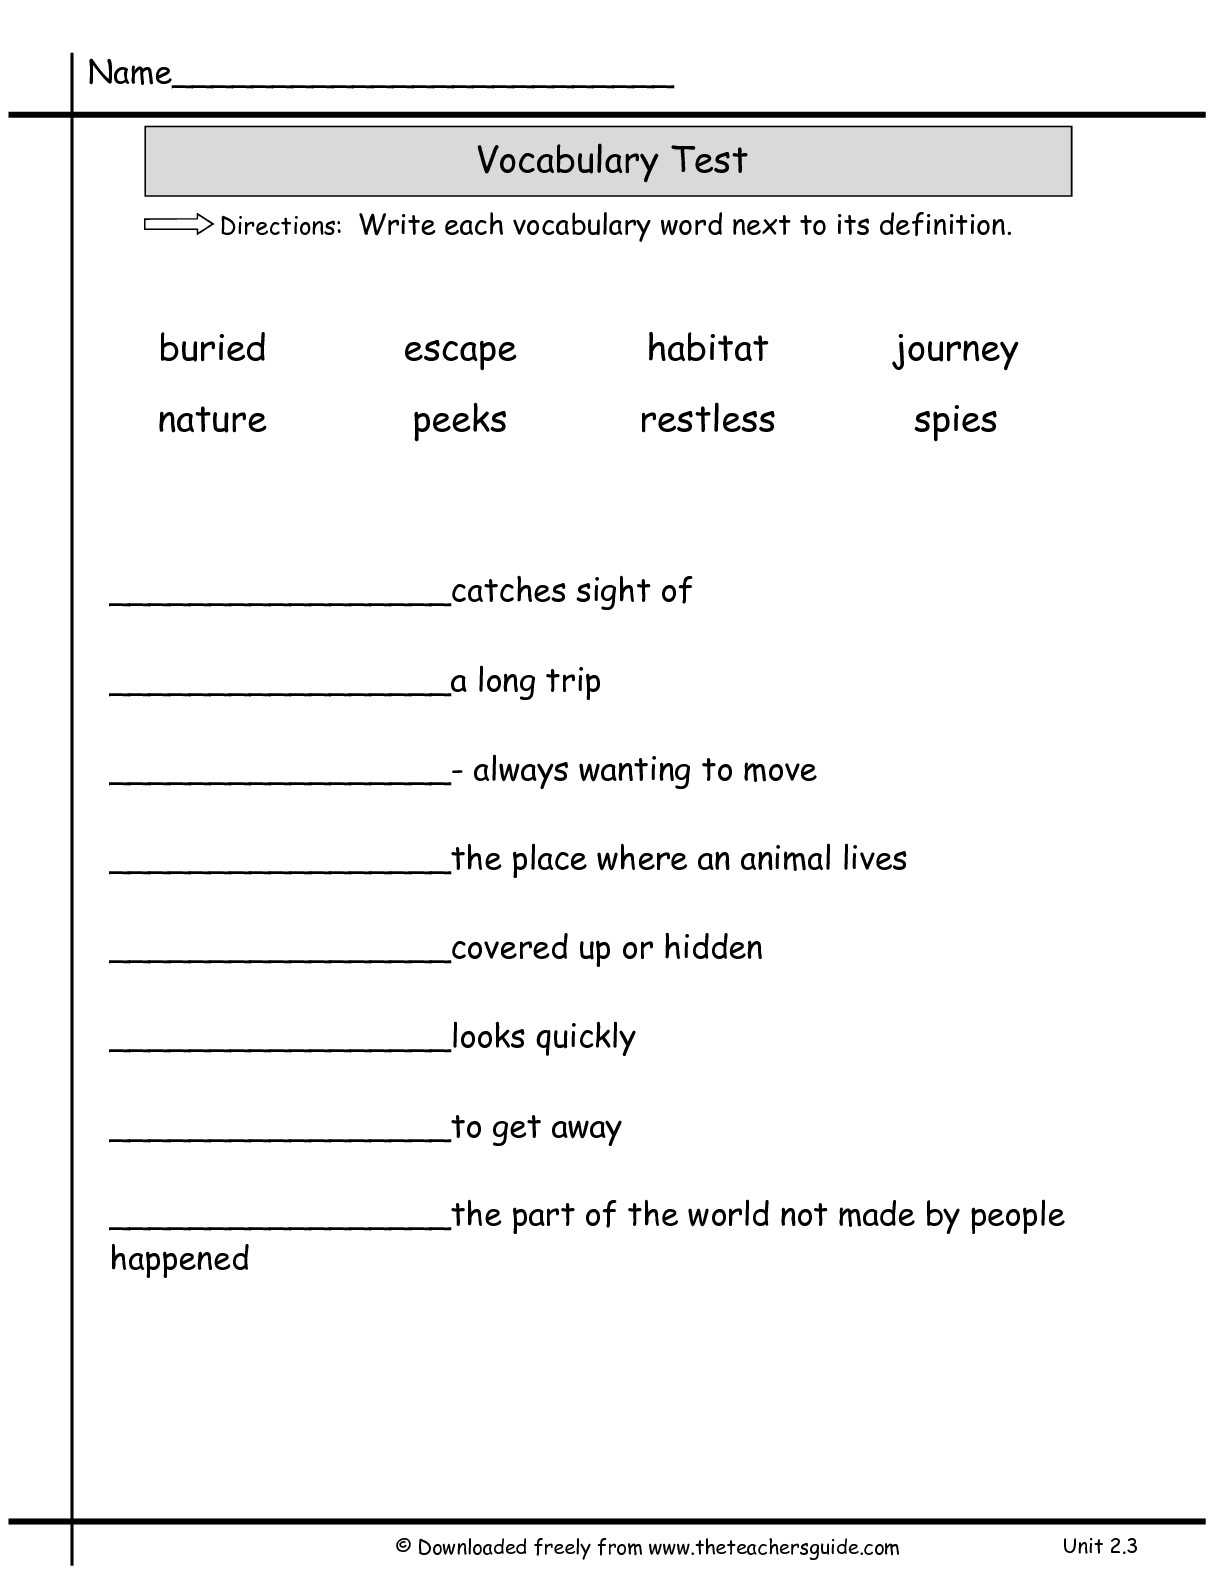 Wonders Second Grade Unit Two Week Three Printouts Throughout Vocabulary Words Worksheet Template